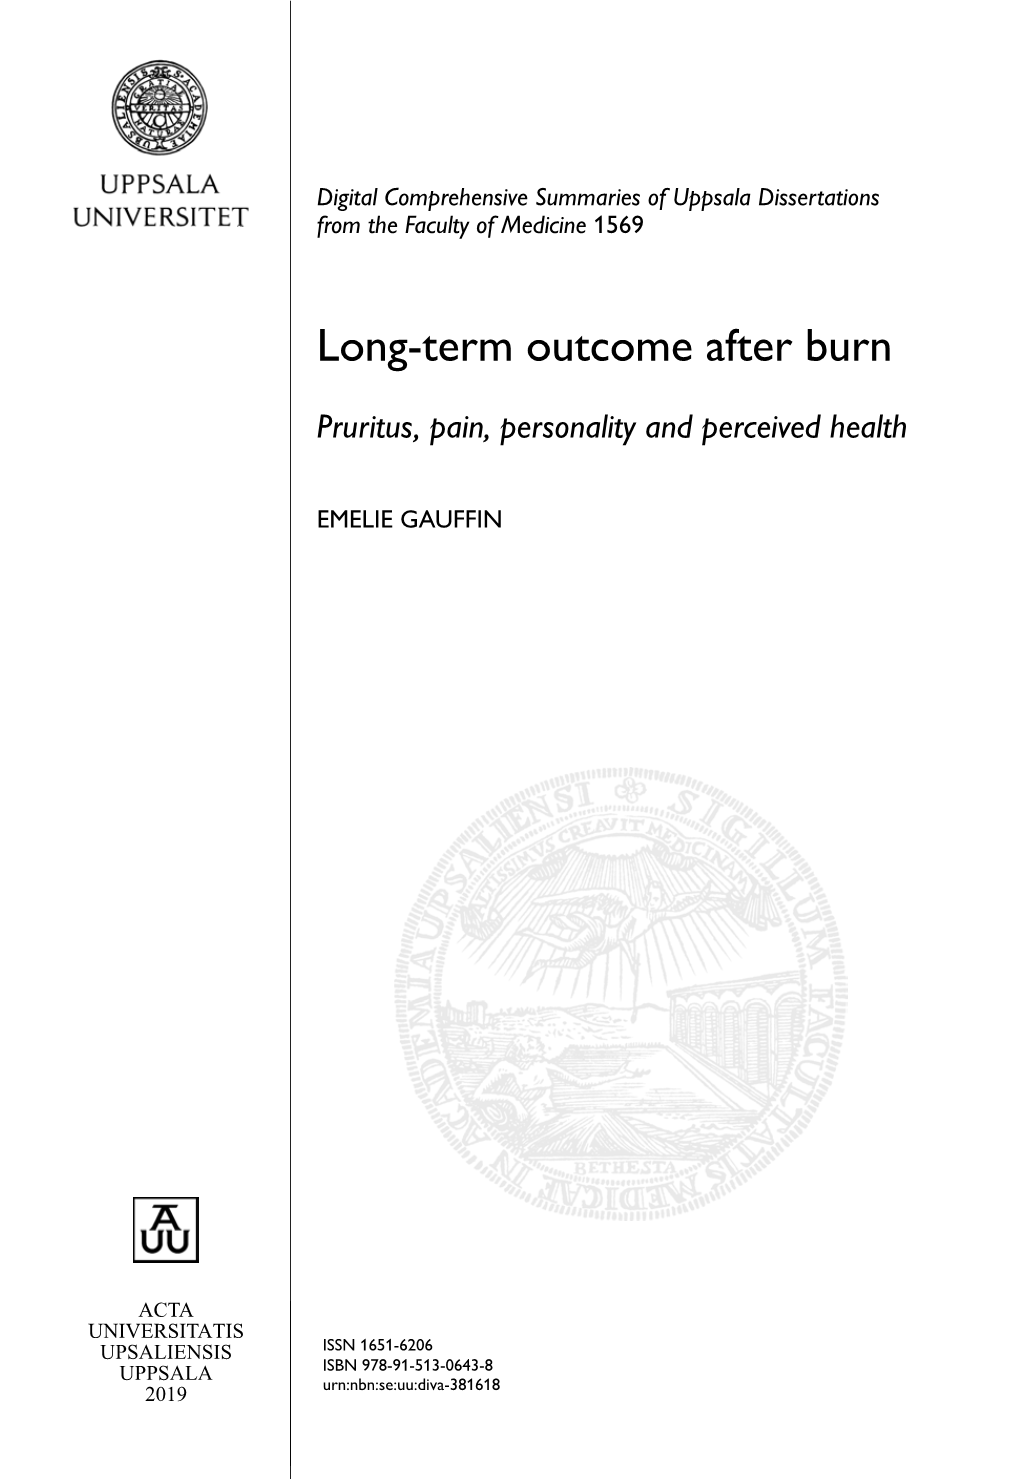 Long-Term Outcome After Burn